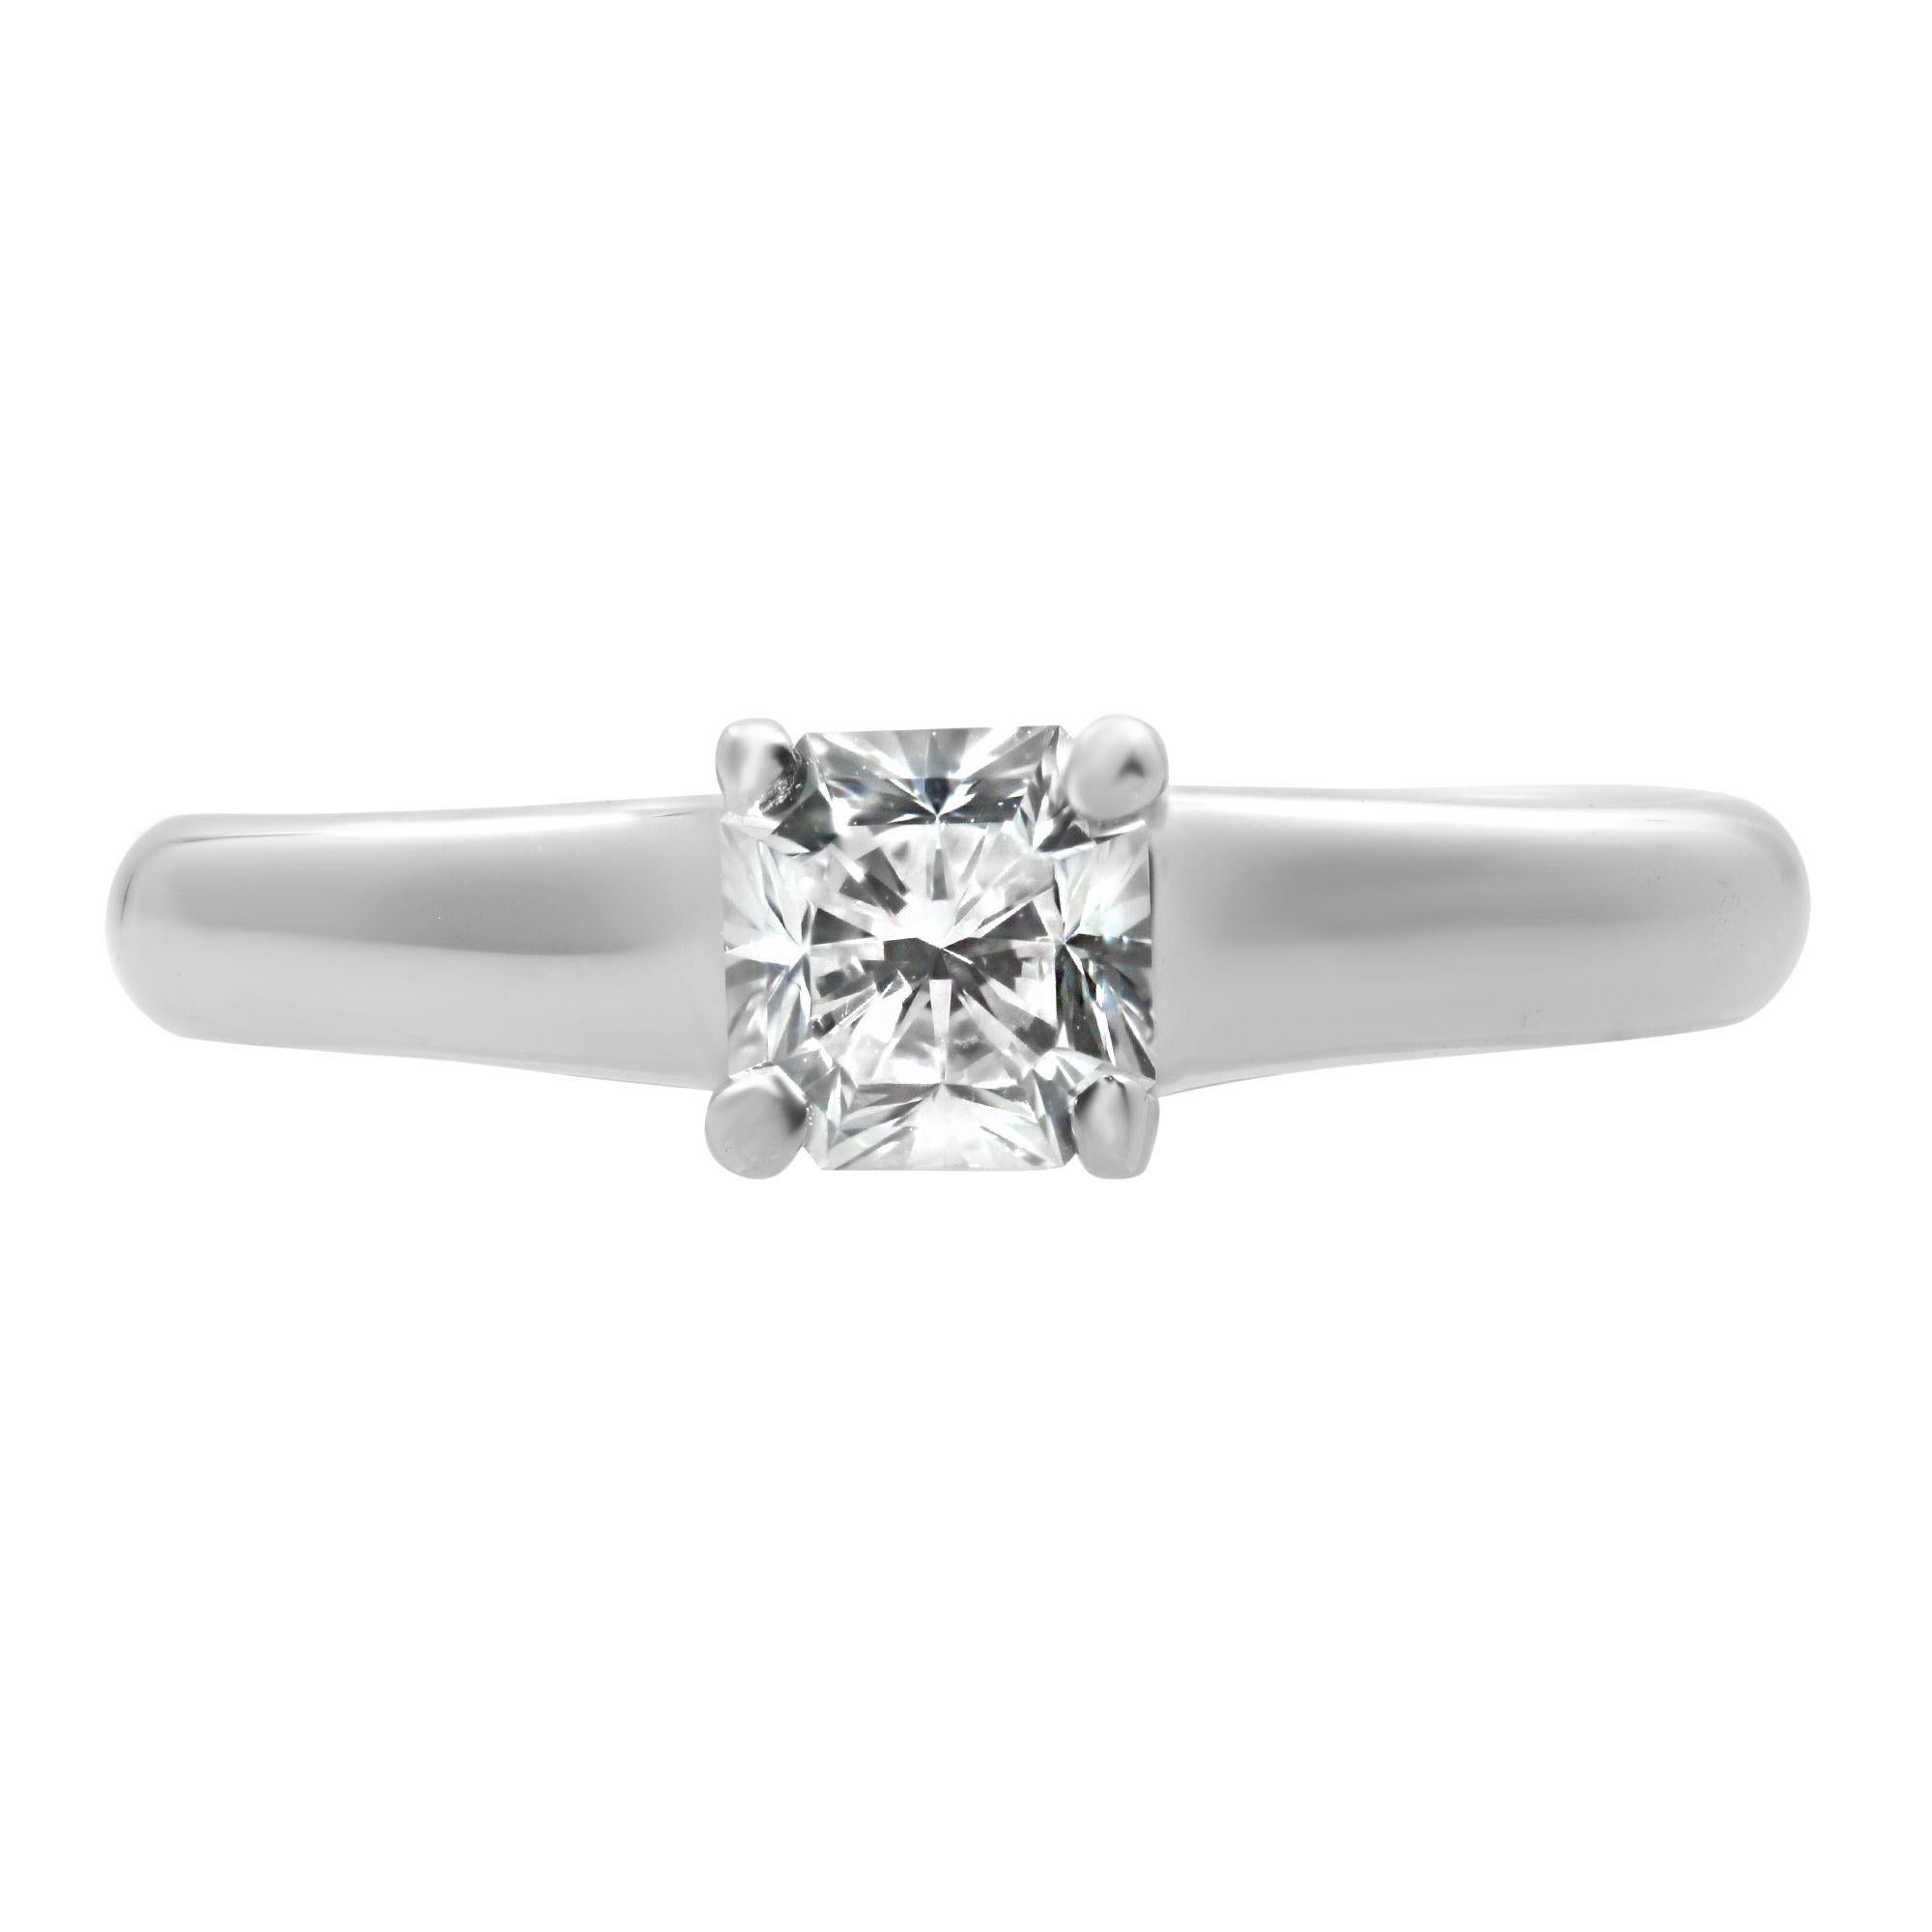 Tiffany & Co. Platinum Lucida Diamond Wedding Solitaire Engagement Ring. Total carat weigh 0.41. G color and VVS2 clarity. Ring  size 6. Great pre-owned condition. Comes with Tiffany & Co pouch and a polishing service receipt from Tiffany. 